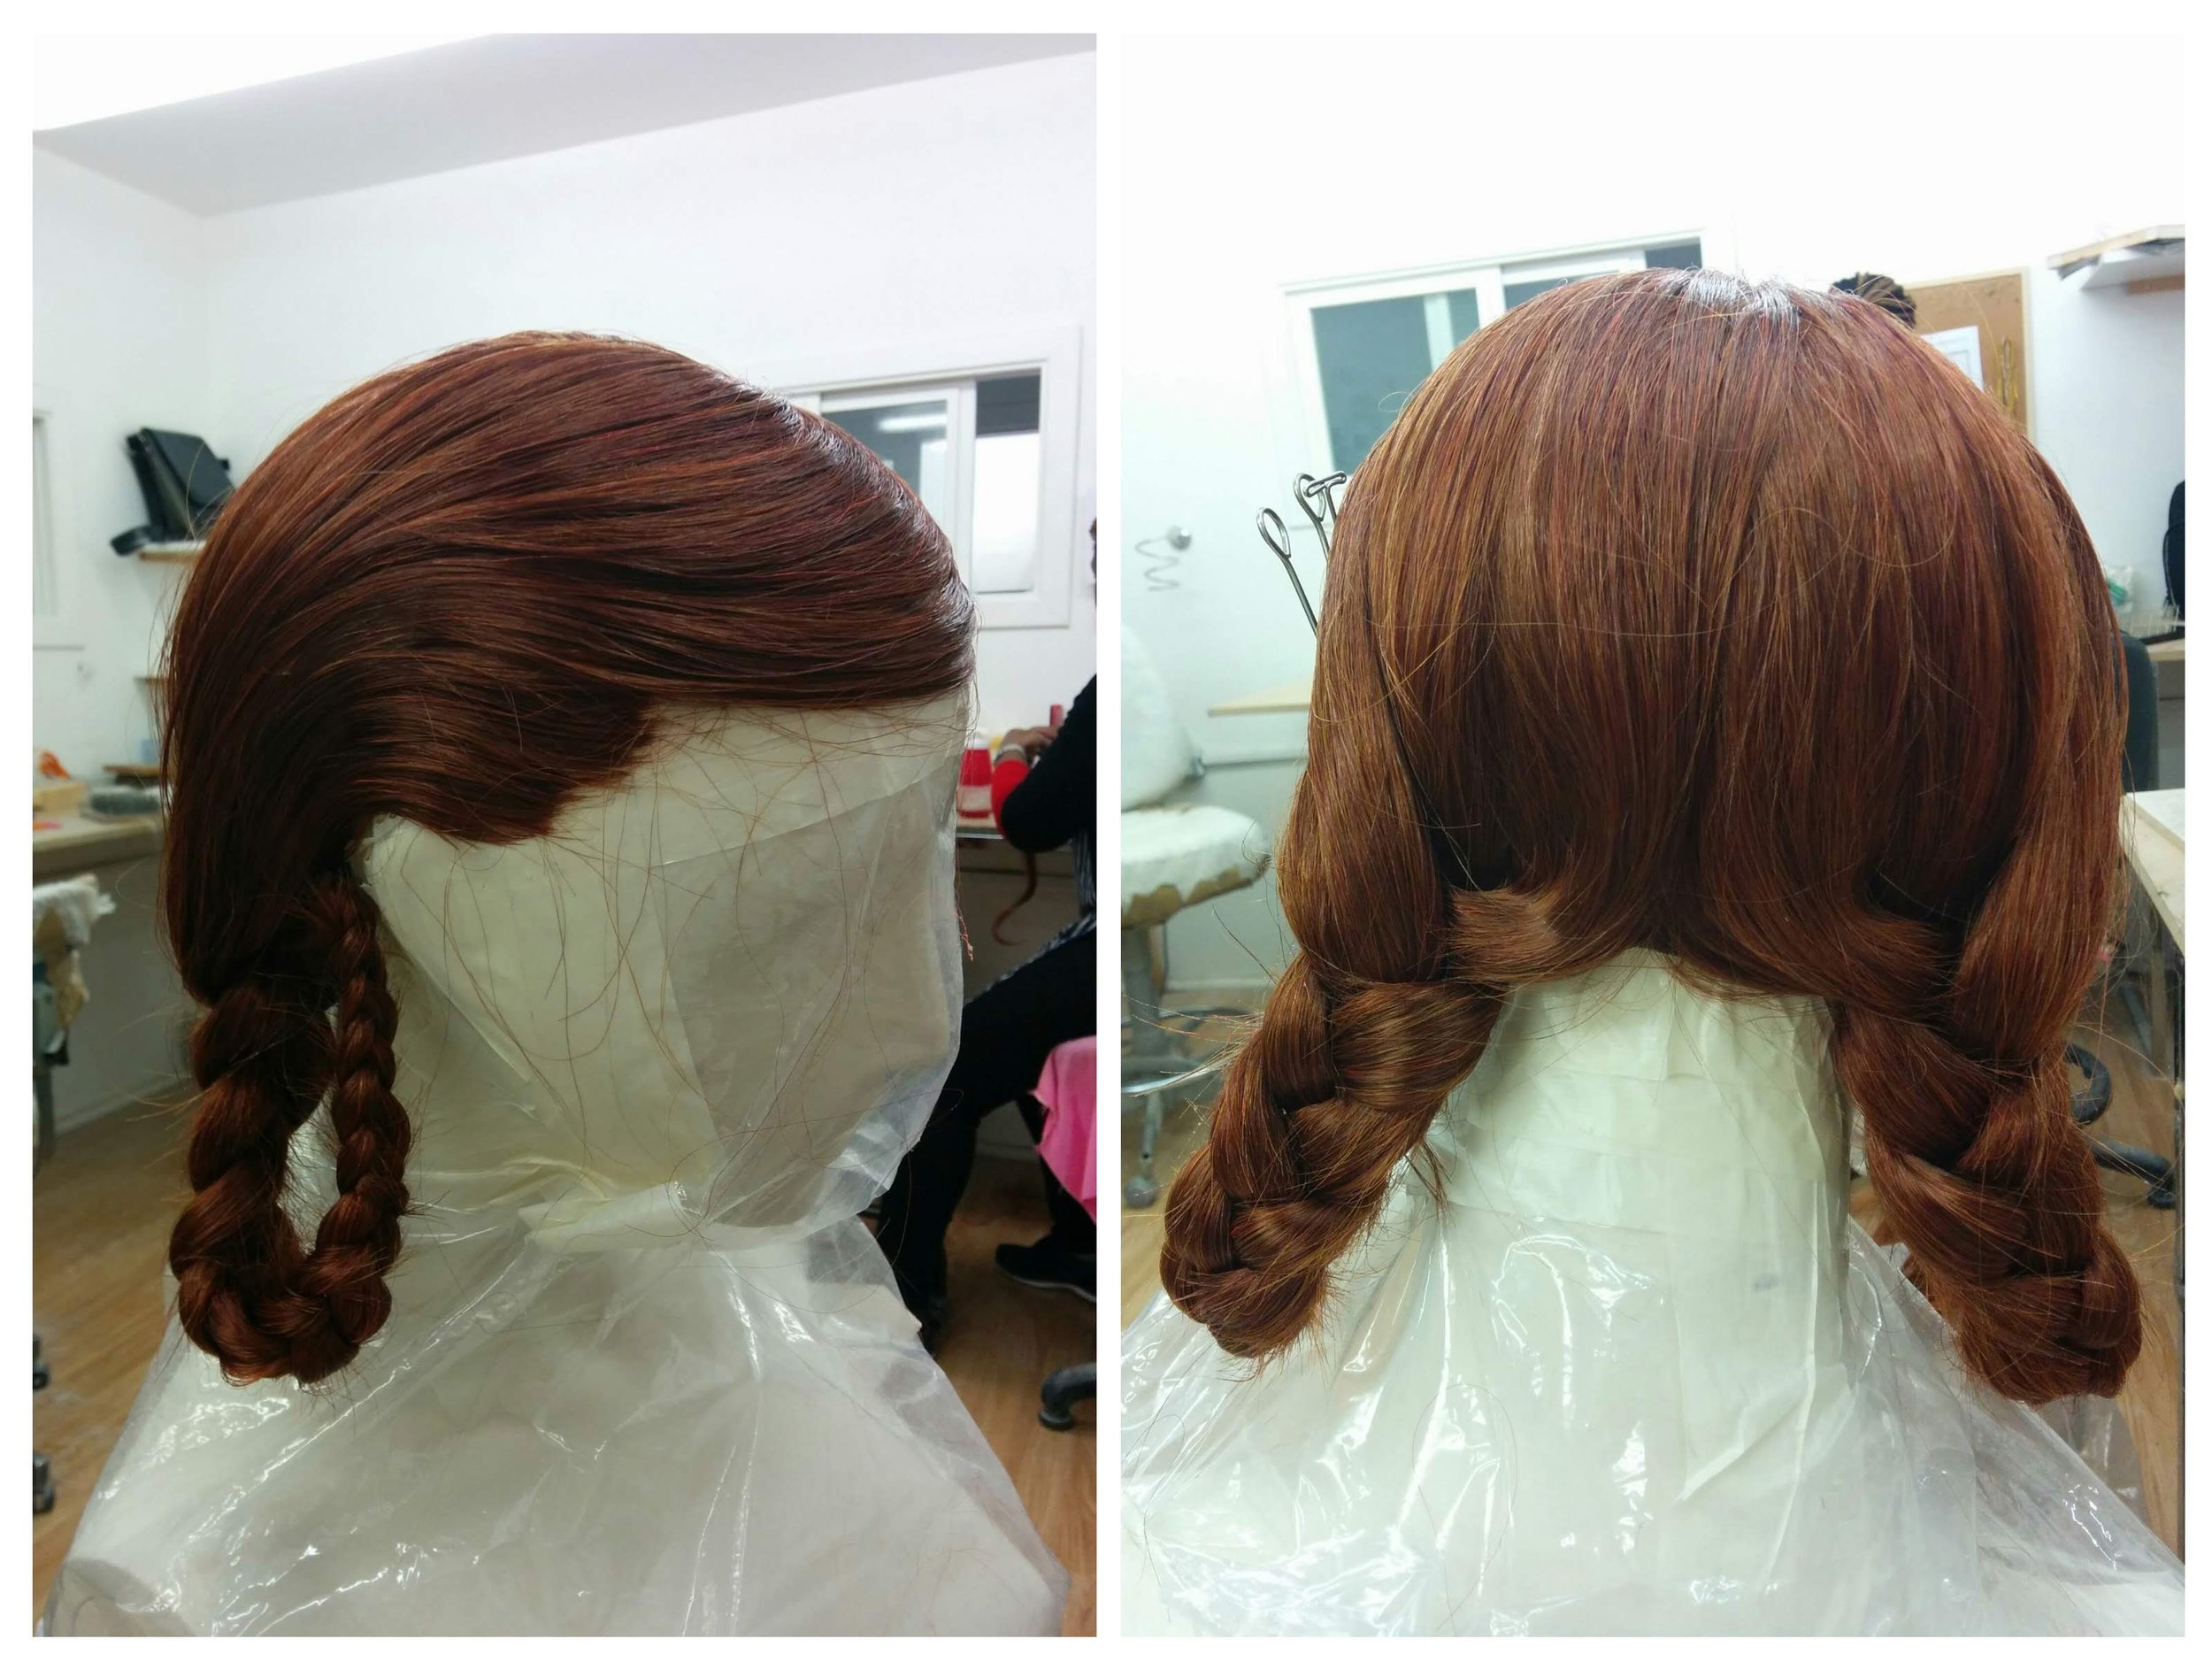 Hard Cap Braided wig for TopShop